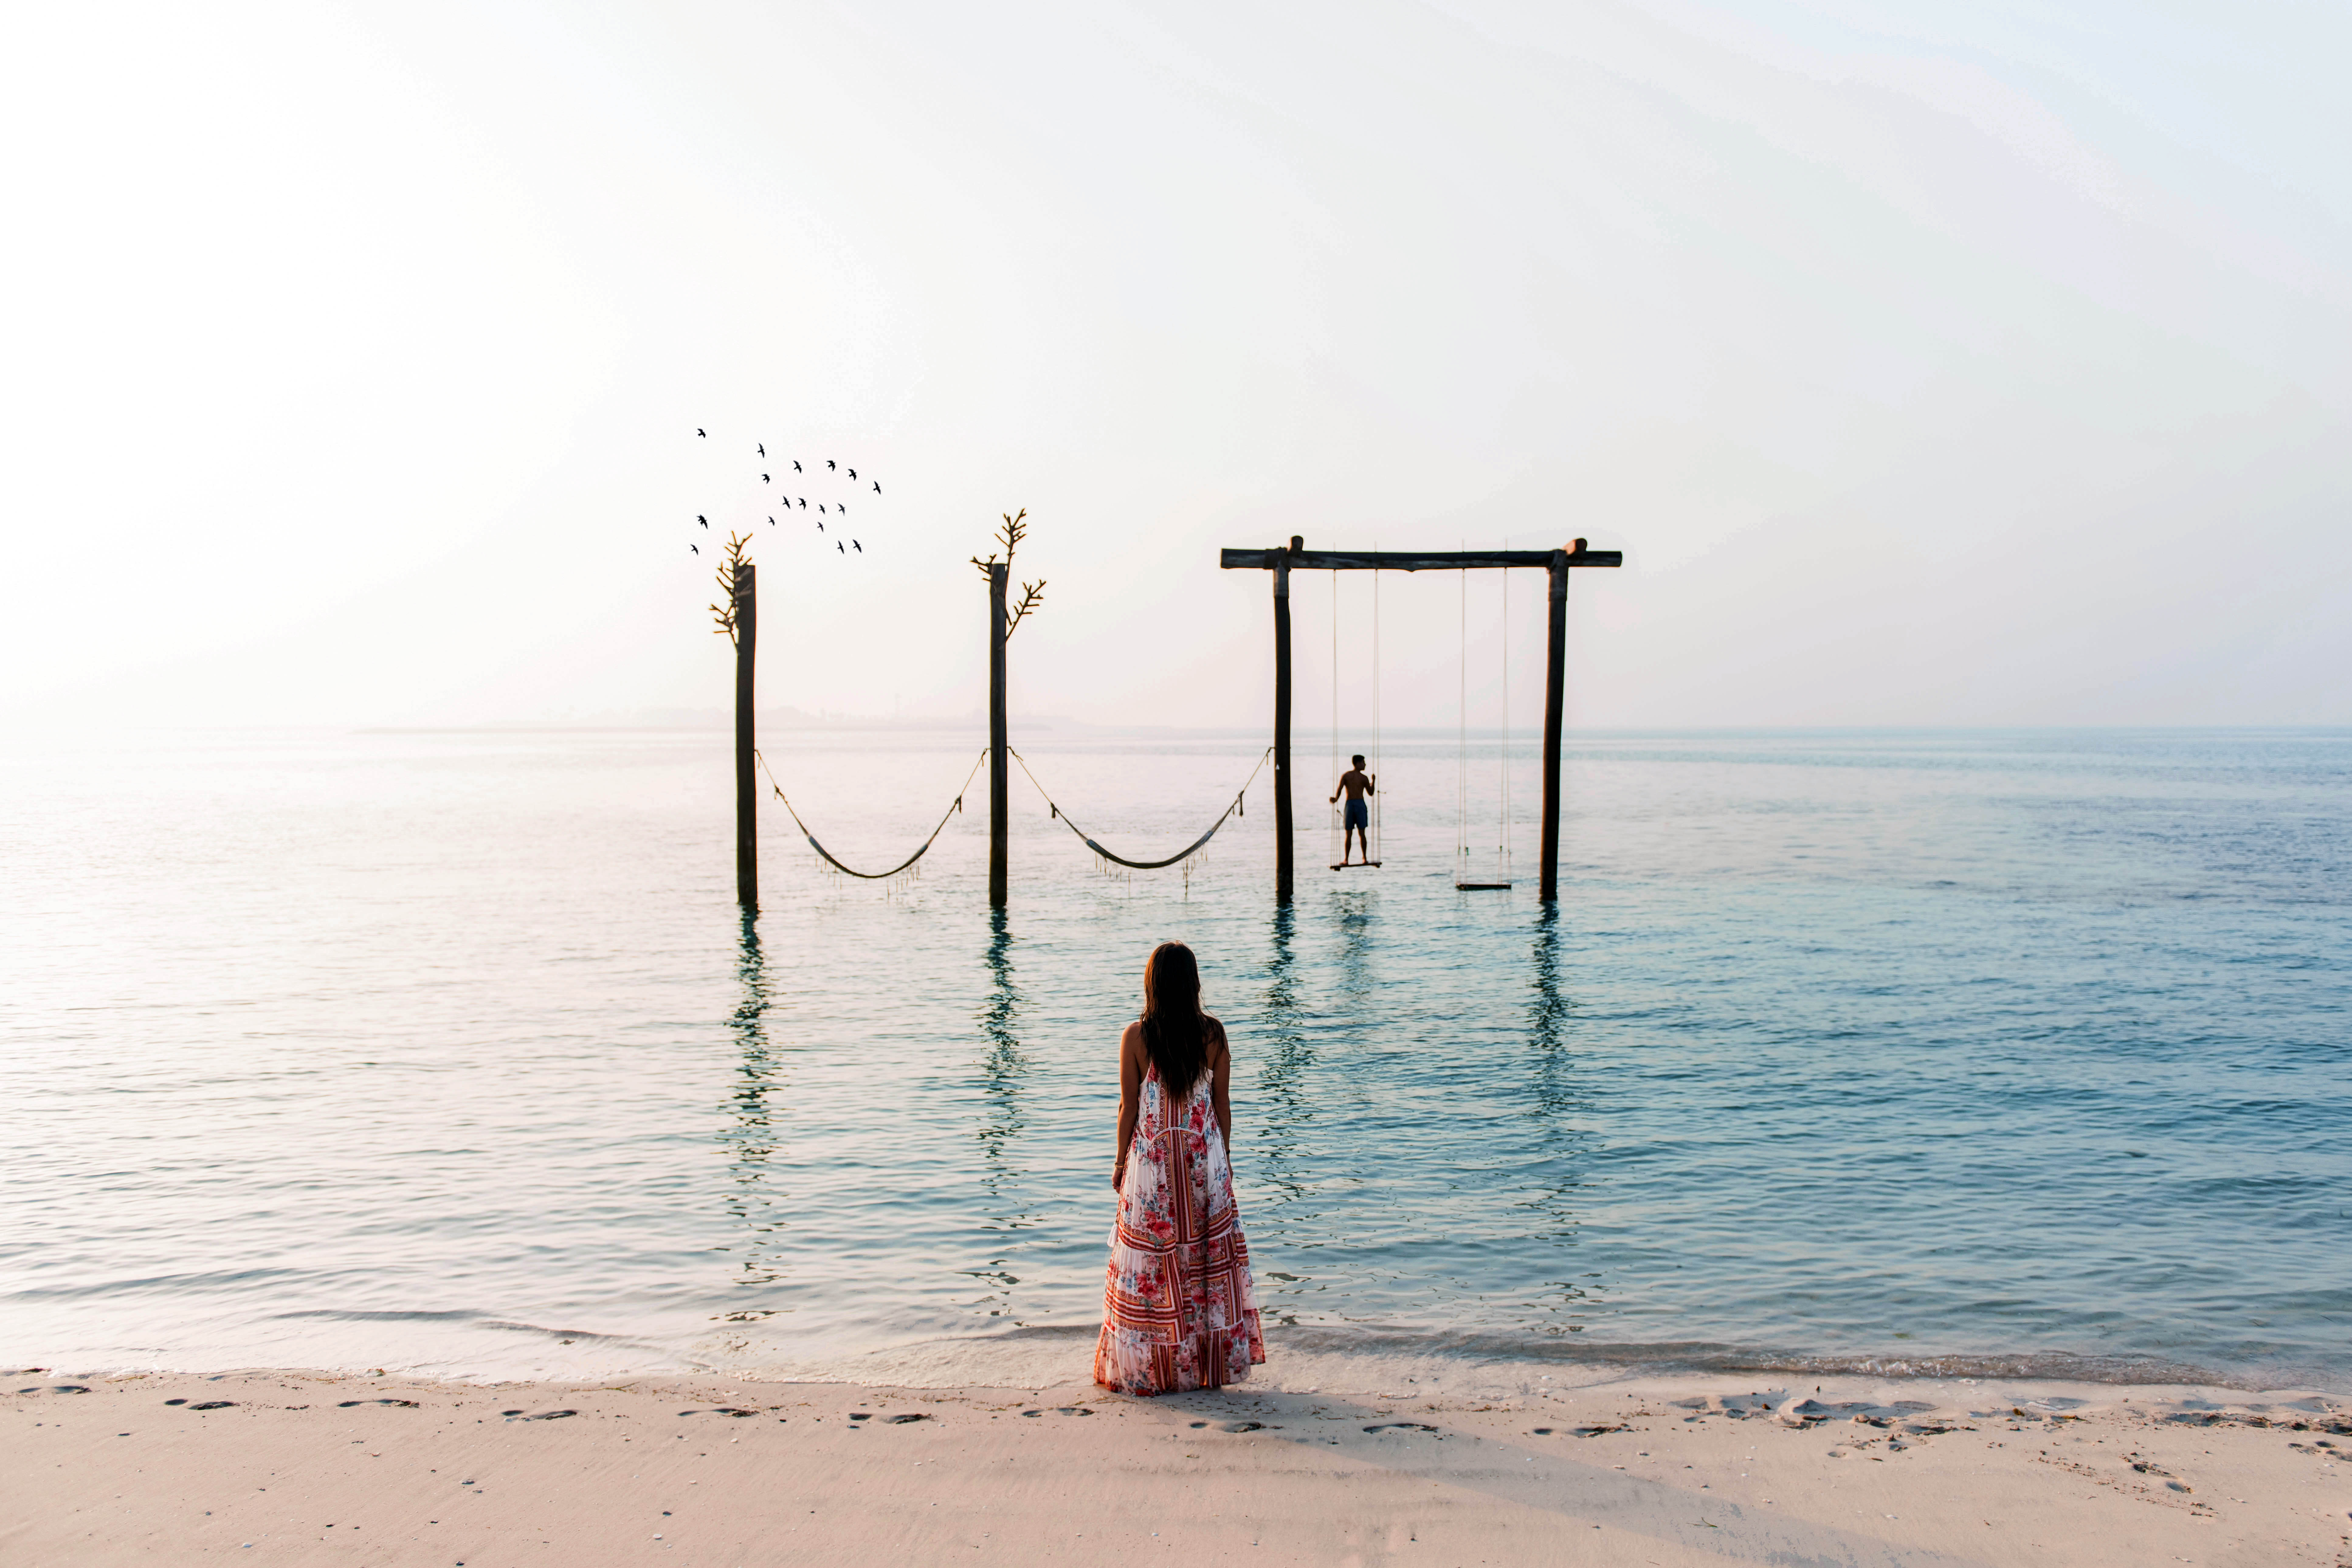 Woman standing at the beach shore in Abu Dhabi watching husband on beach swing